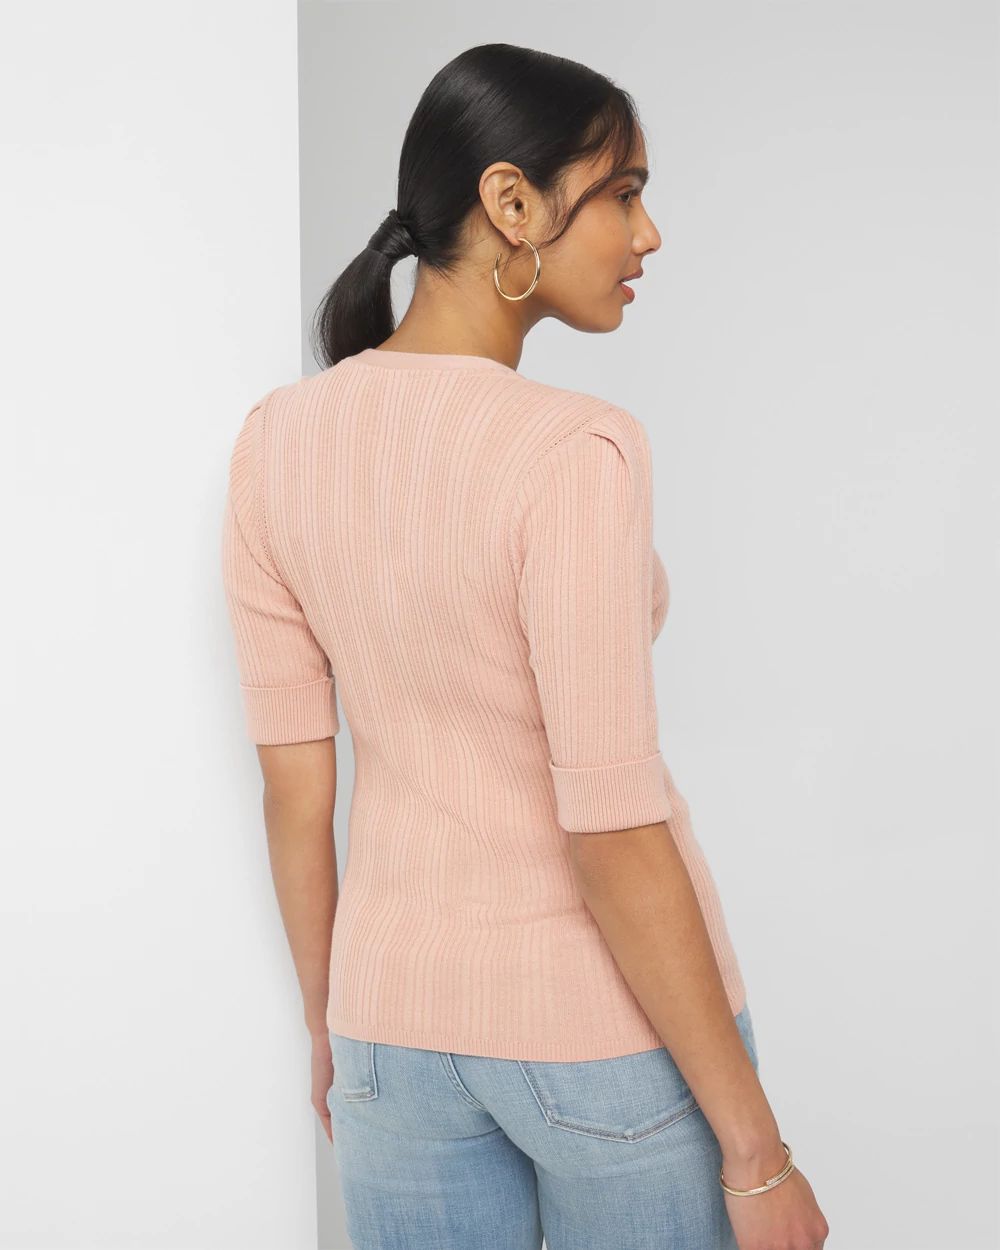 Cashmere Blend Elbow-Sleeve Henley Sweater click to view larger image.